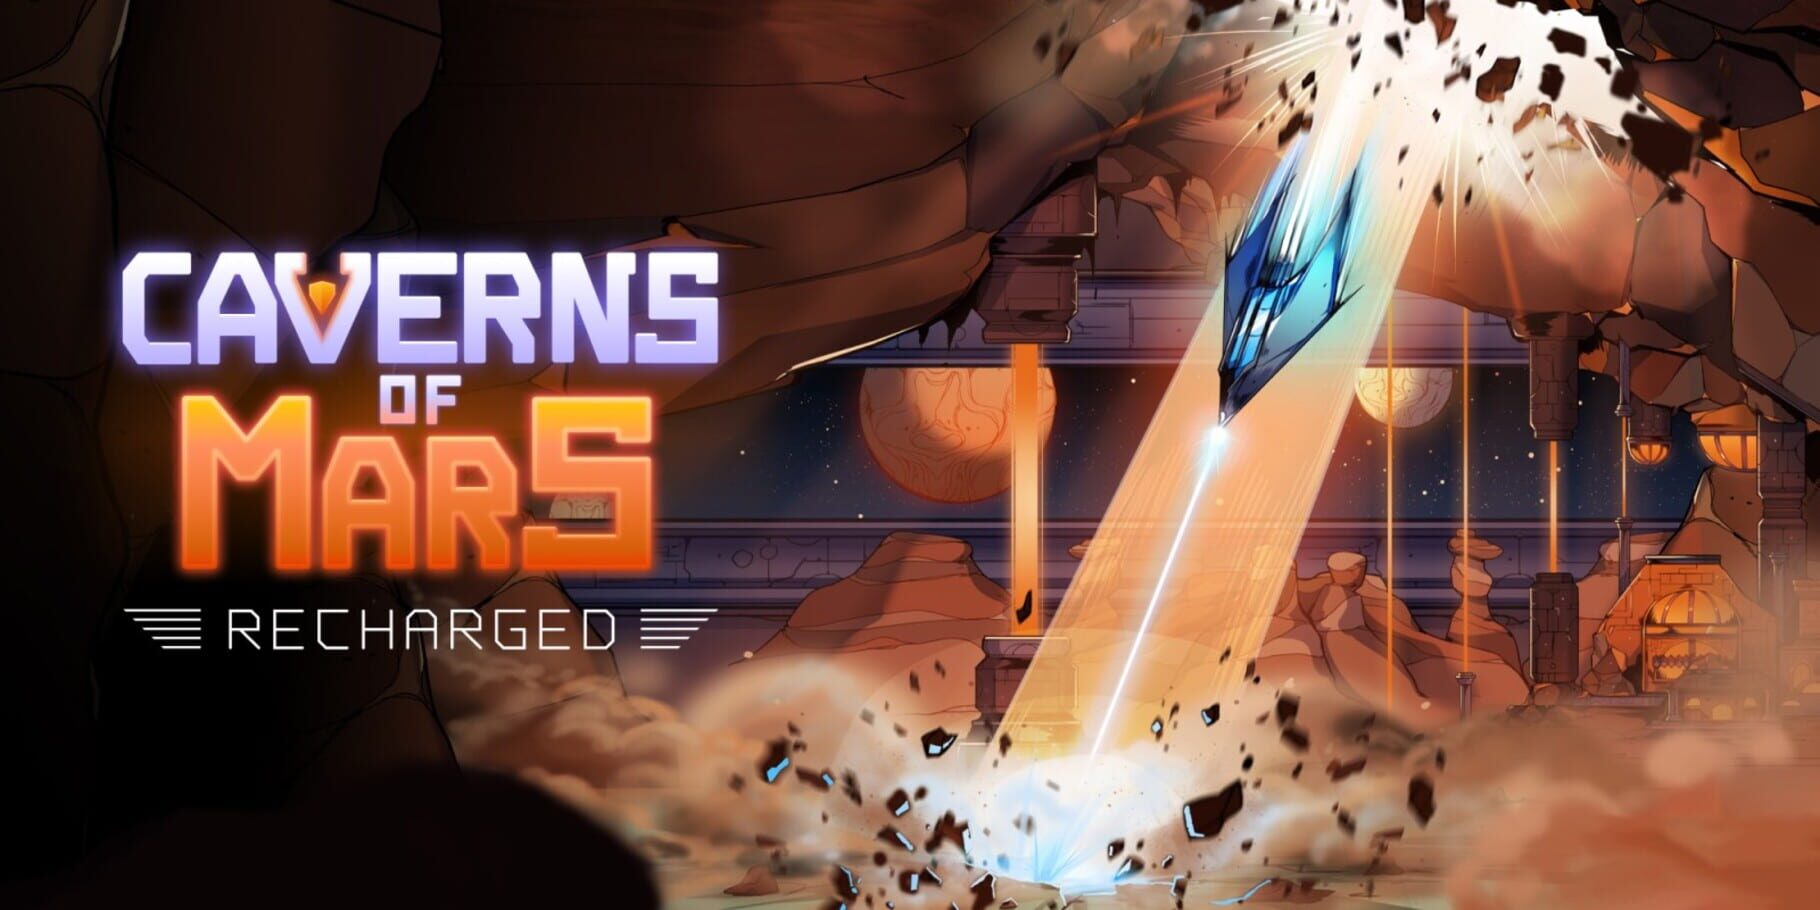 Arte - Caverns of Mars: Recharged